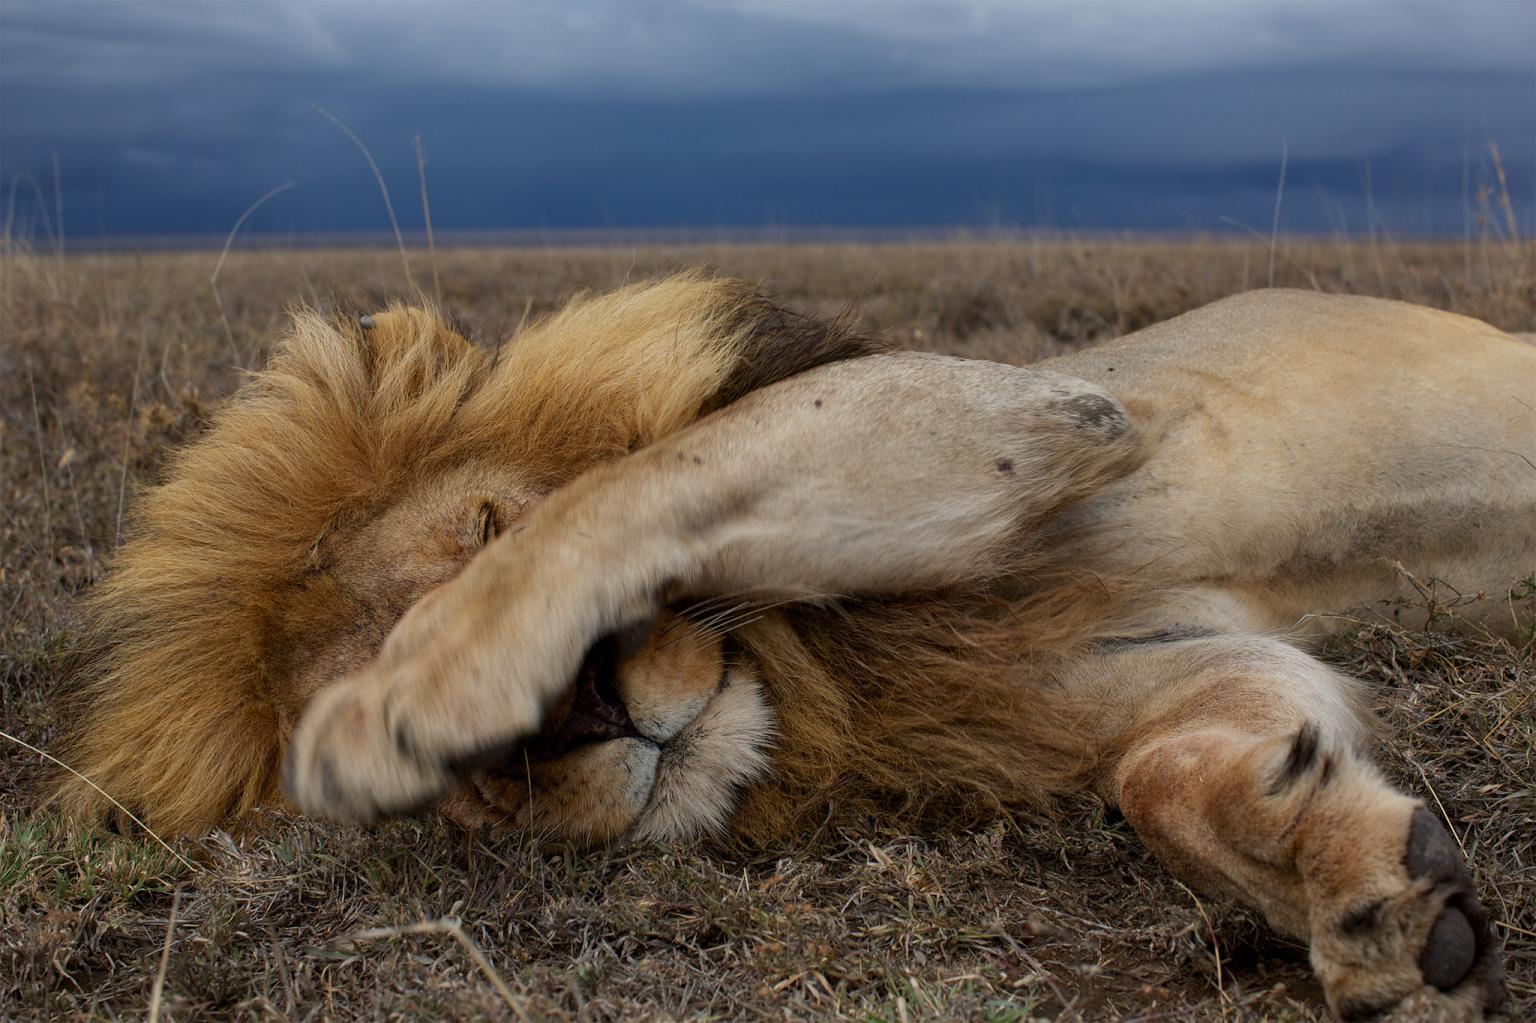 A lion sleeps in the plains of Serengeti National Park. The picture was taken by a camera-mounted robot car.